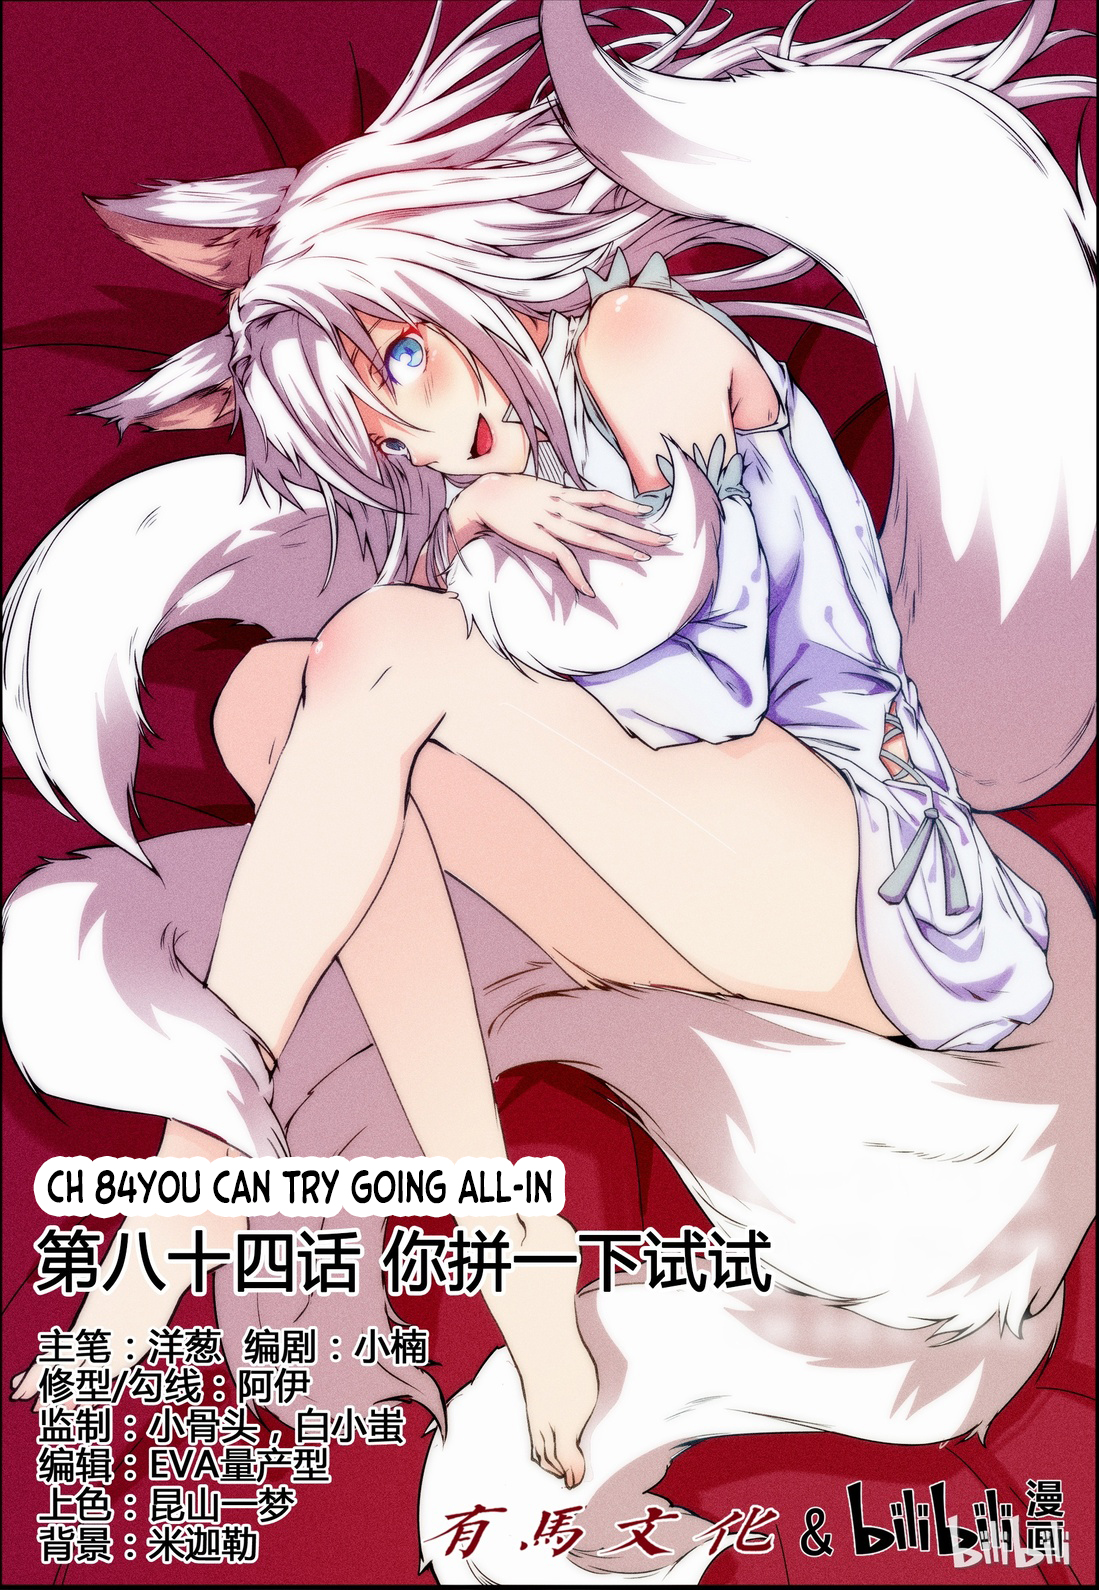 My Wife Is a Fox Spirit Ch. 84 You can try going all in